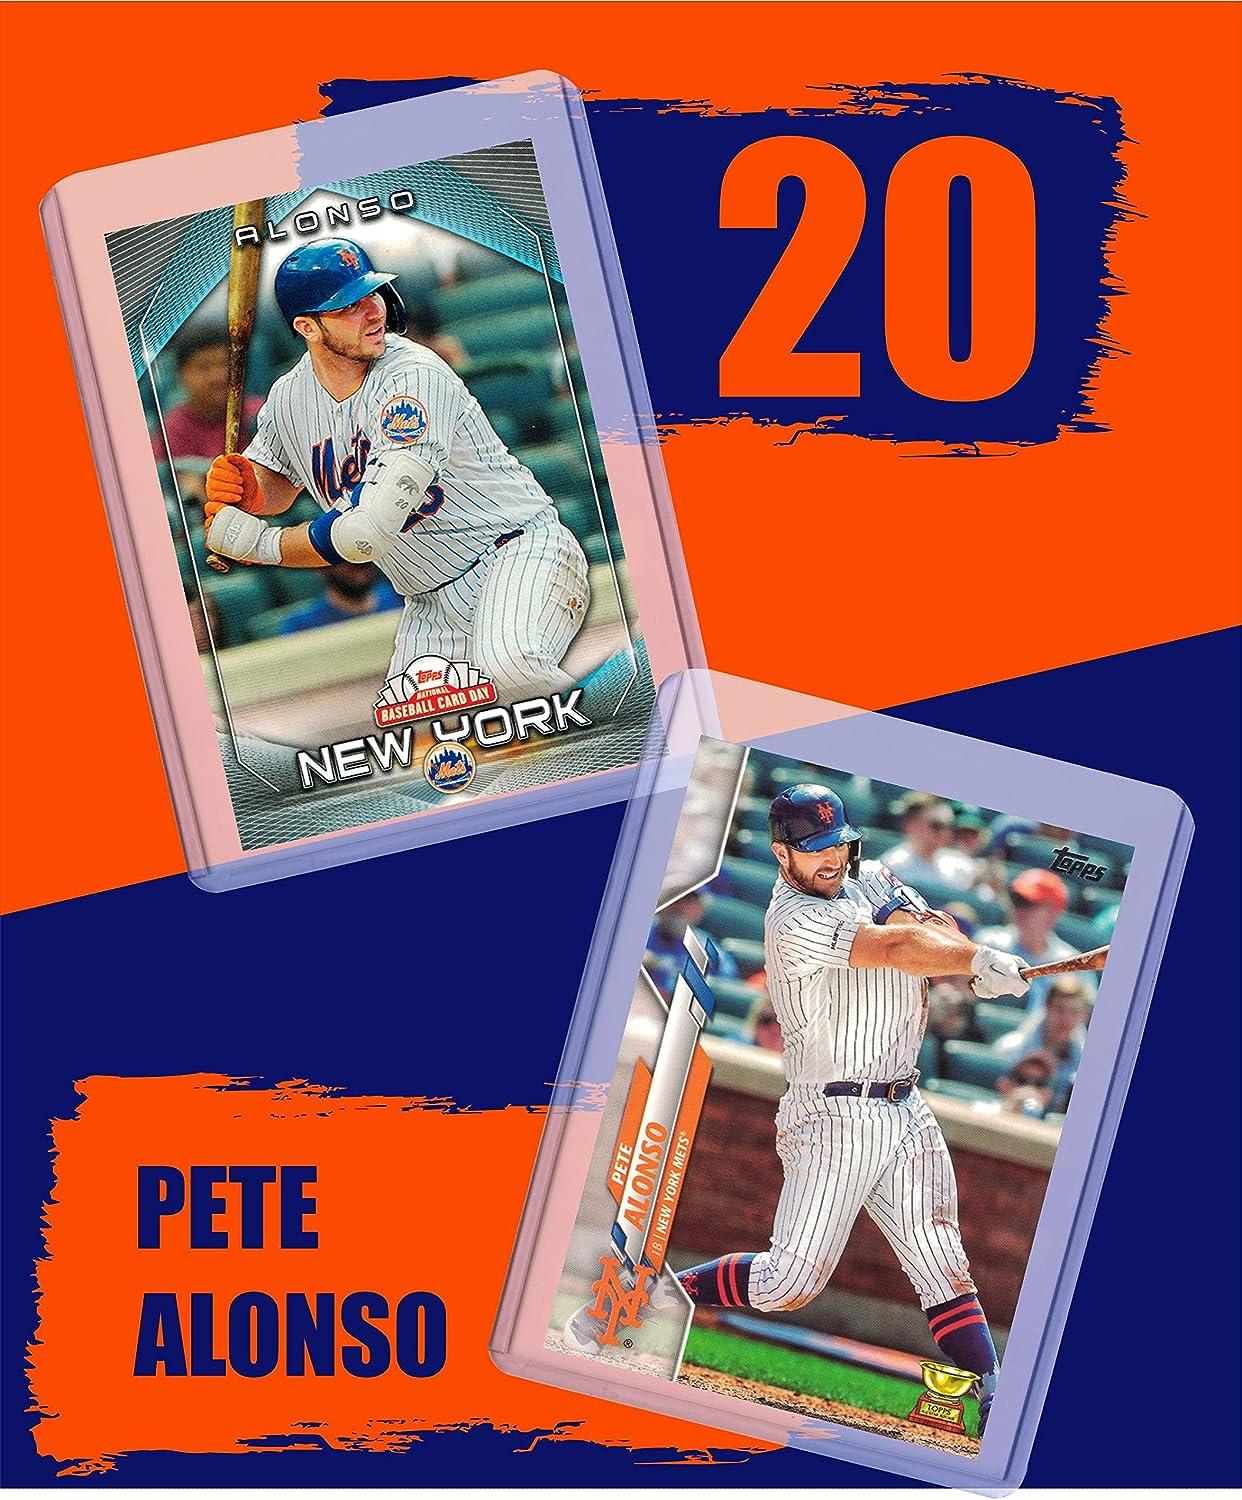 Pete Alonso Baseball Cards (5) Assorted New York Mets Trading Card and Wristbands Gift Bundle